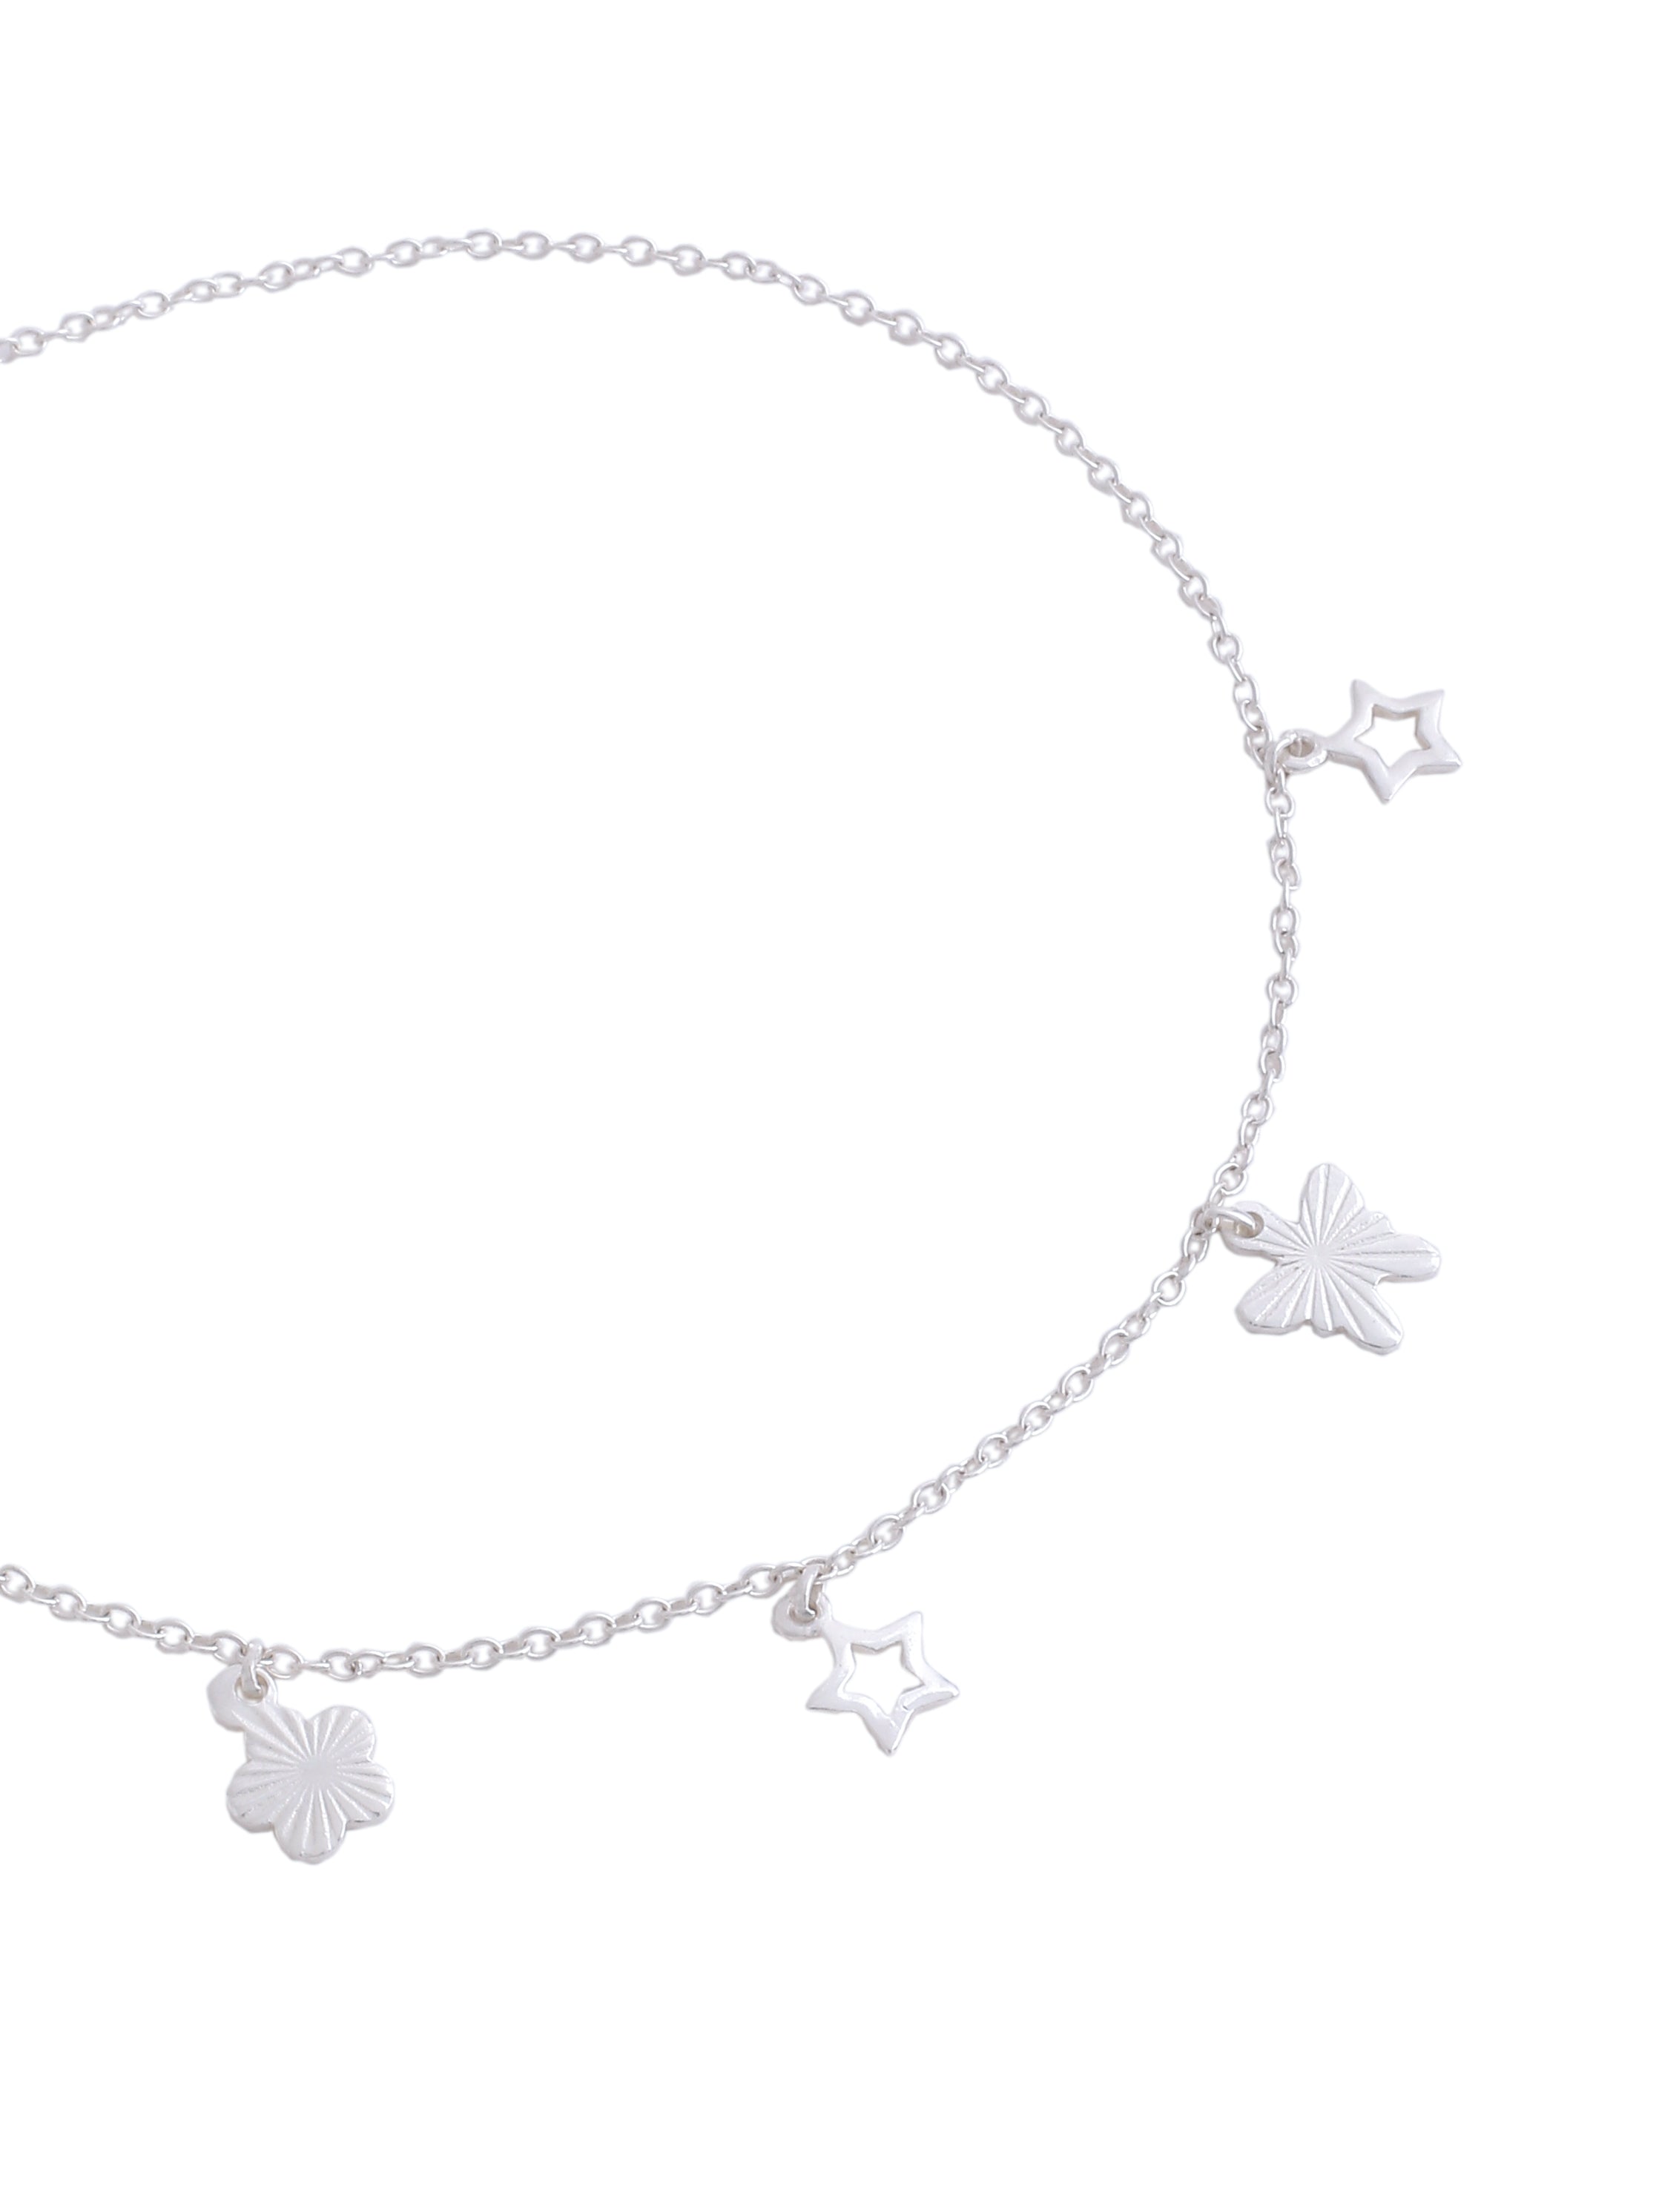 Celestial Charm Anklet in Sterling Silver